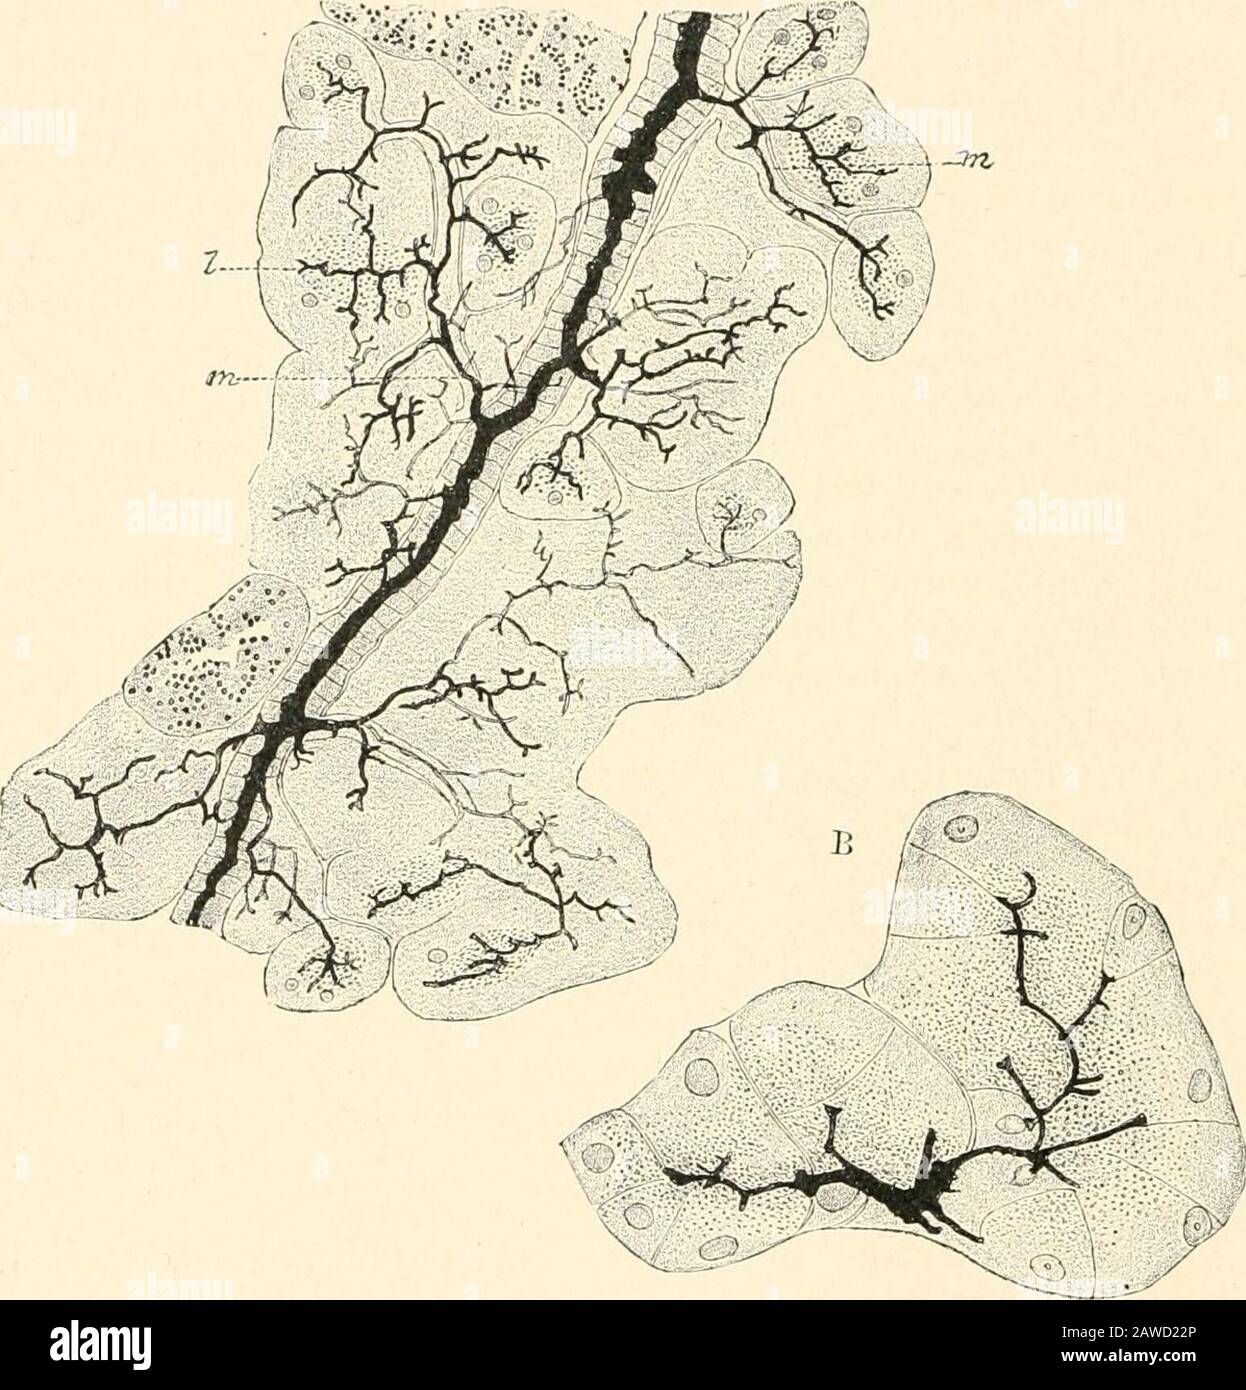 Human physiology . com-pletely, and separating them sharply from the alveolar tissue.Eenaut (1879) pointed out a reticulum enclosing the islets, asdid also Opie and Pugnat. On the other hand, Gibbes, Diamare,and Hansemann denied these observations. To solve the problemMarshall Flint (1903) employed tryptic digestion, which sparesthis capsule ; and decided that it existed. Laguesse also admitted it, but stated that the capsule(menibrana propria) does not completely surround the islets, whichcontract relations with the excretory system at the points atwhich they are not invested. Golgis method d Stock Photo